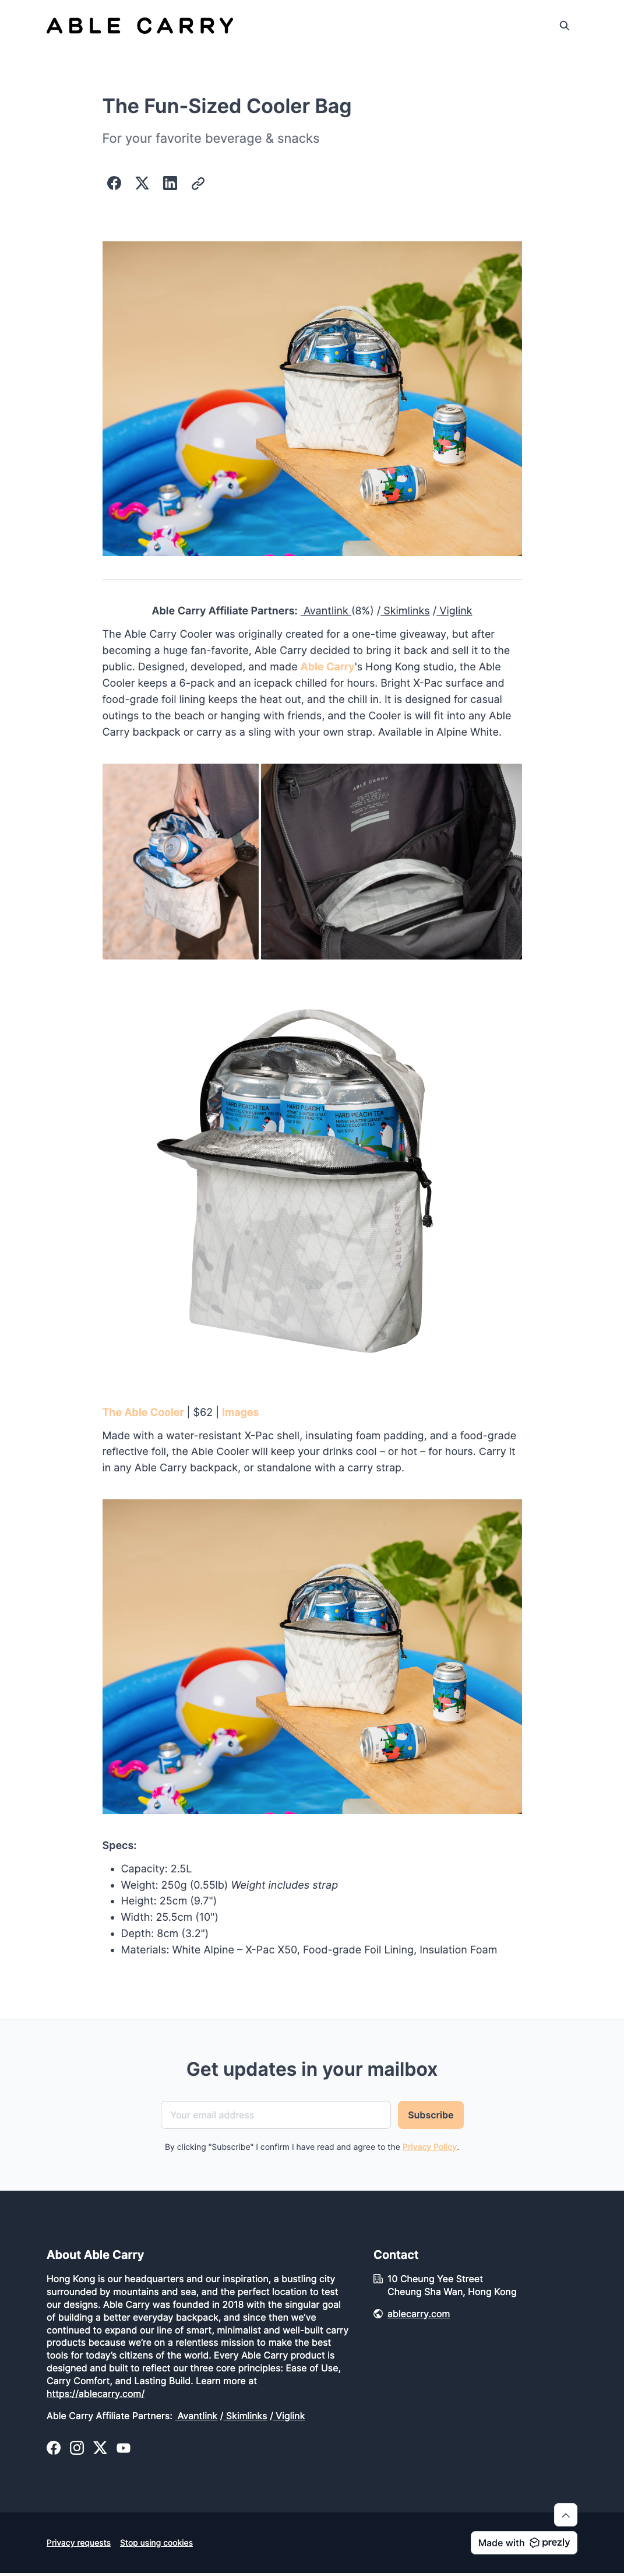 Able Carry's new fun-sized cooler launch